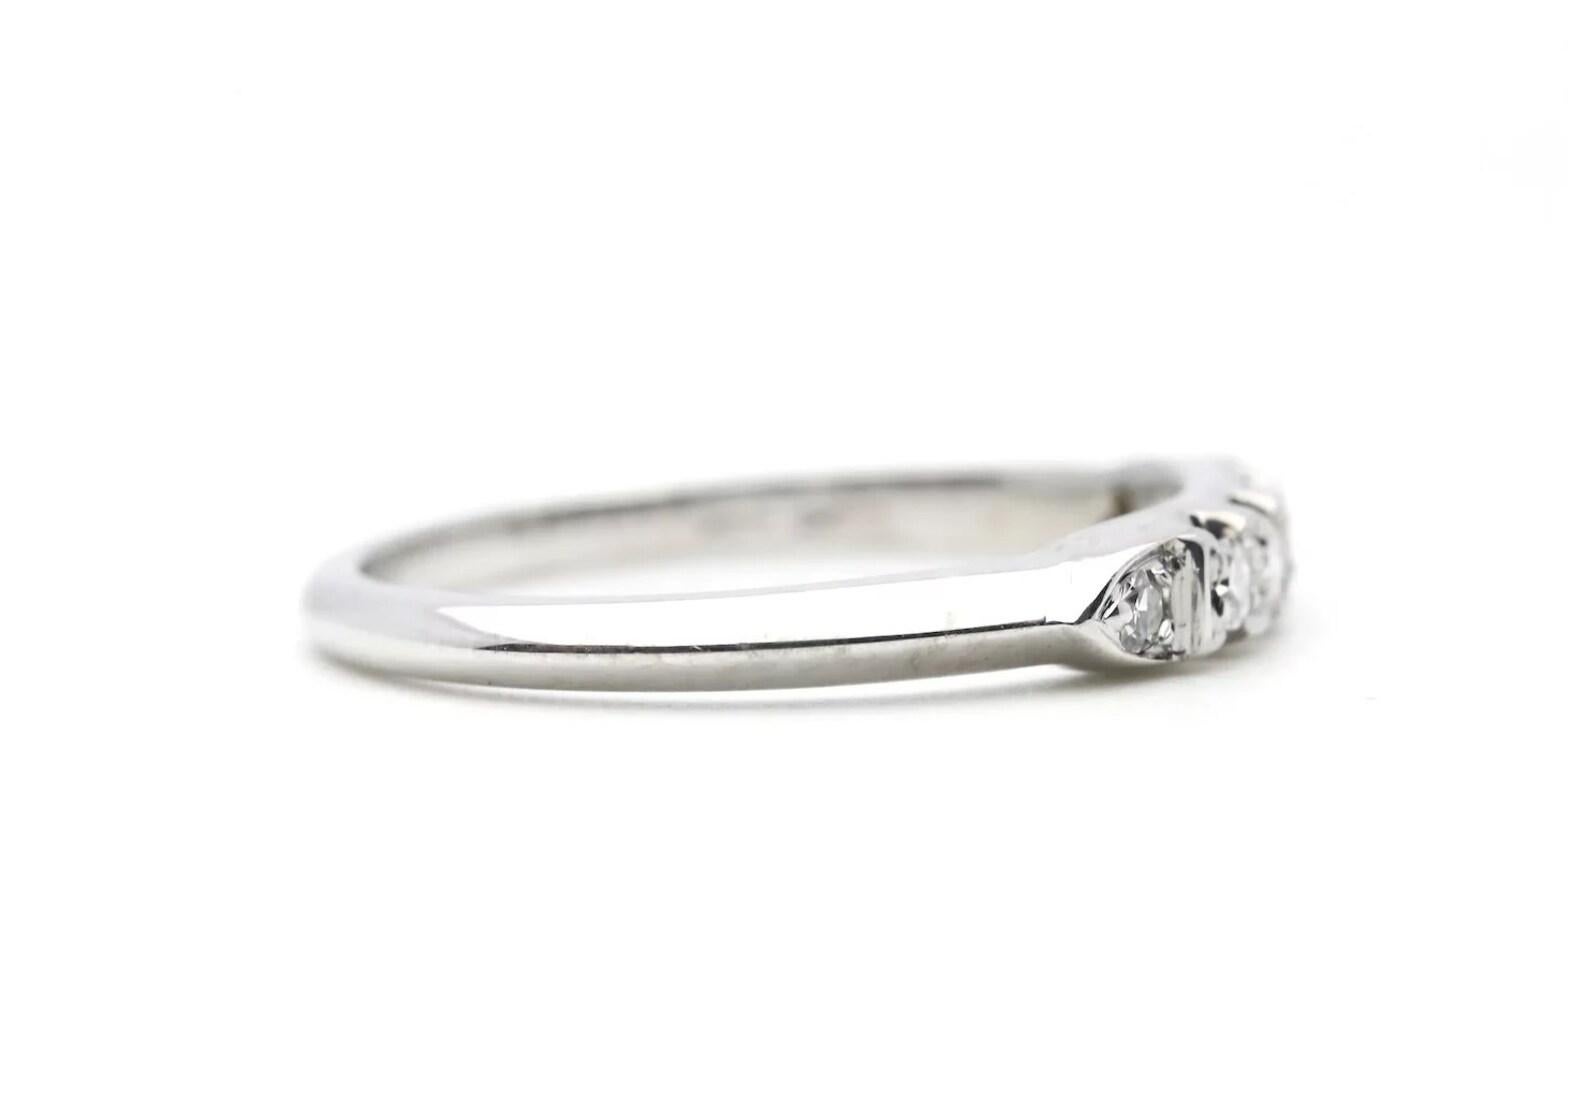 A vintage mid century period diamond wedding band in 18 karat white gold. This band features six round single cut diamonds weighing a combined 0.12 carats. The diamonds grade as G color, VS1 clarity.

In excellent condition, this ring is a size 6 US